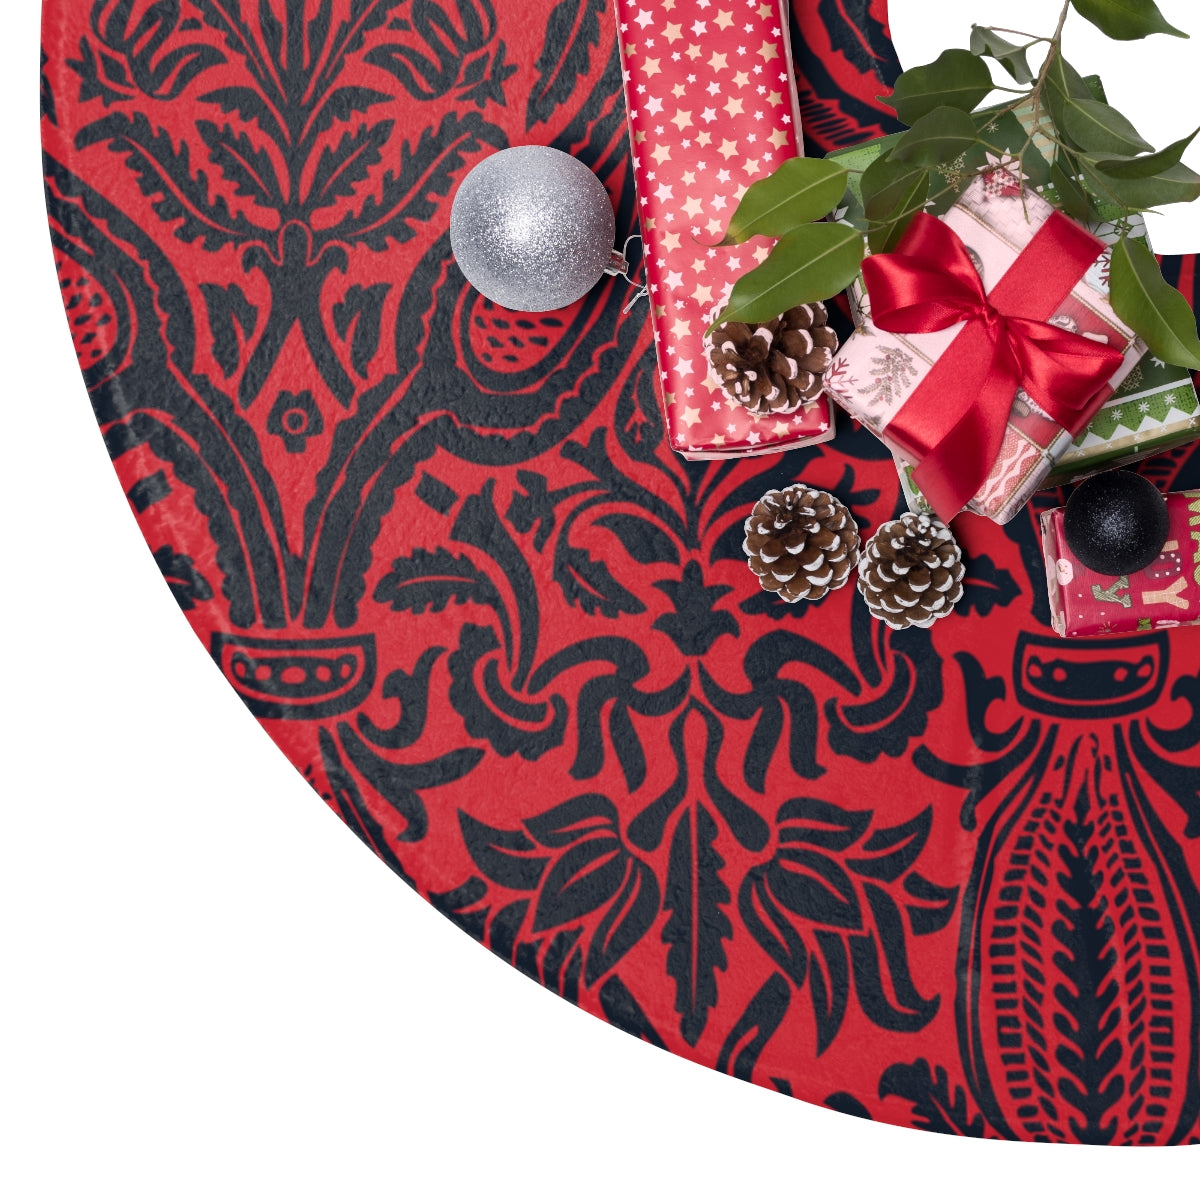 red and black vicorian tree skirt in vintage pattern